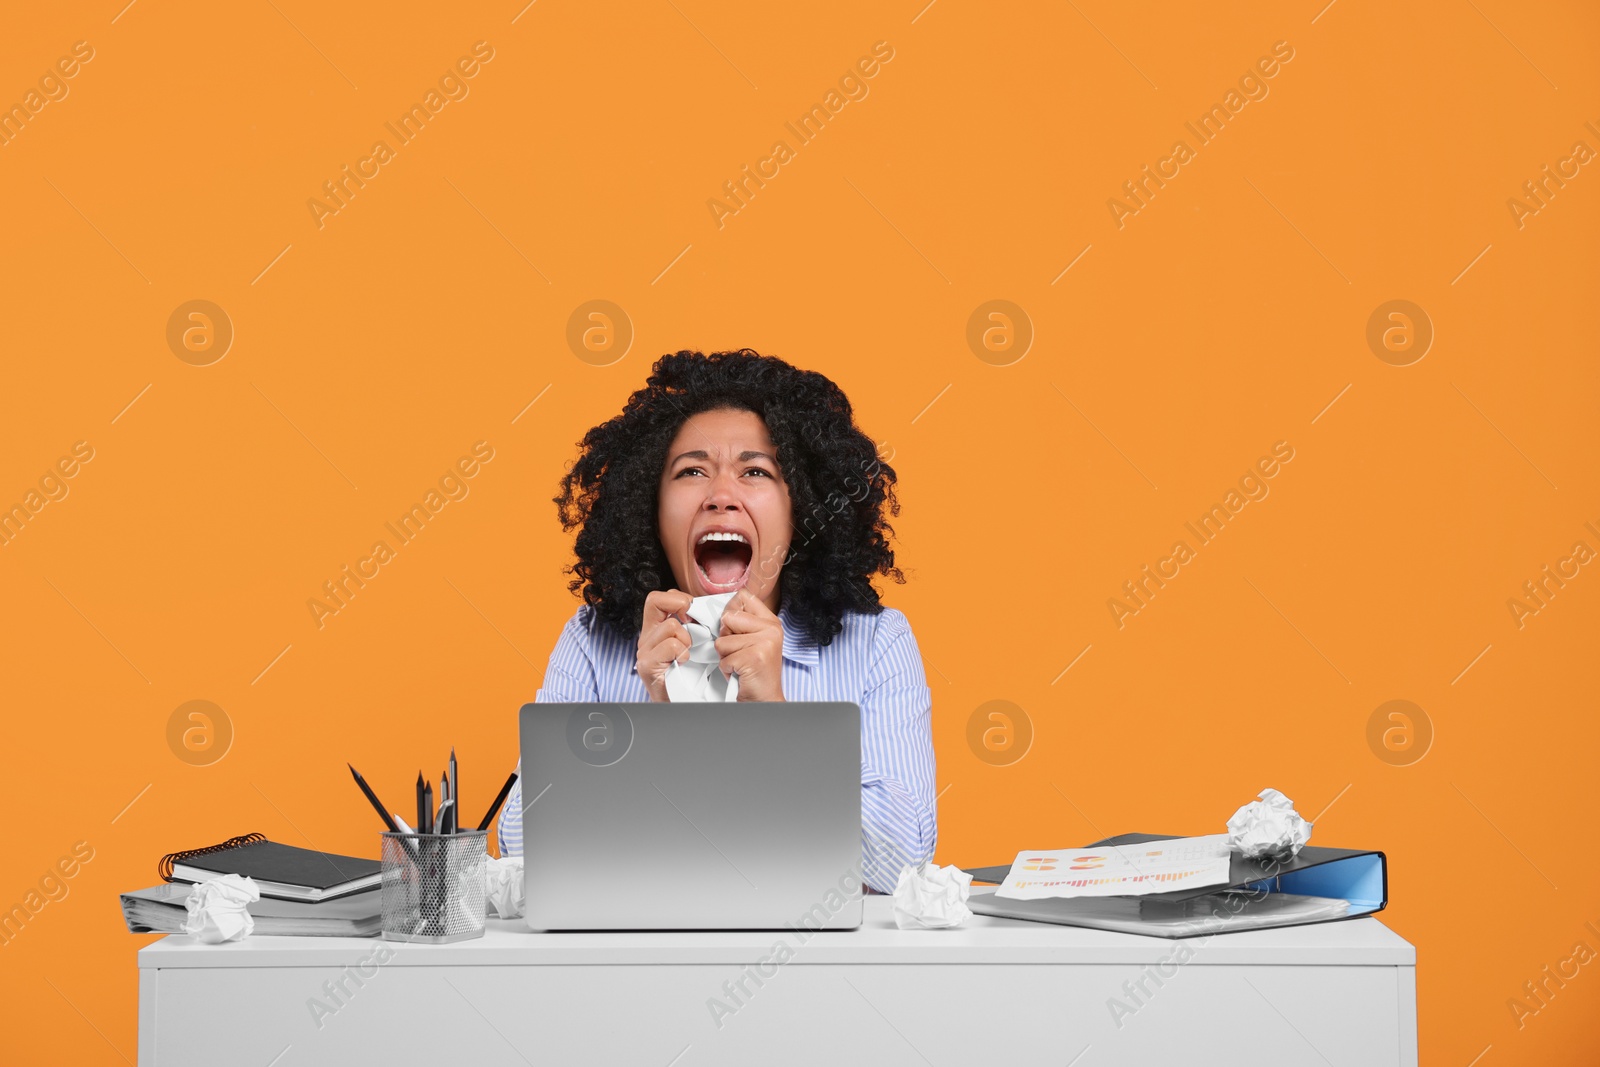 Photo of Stressful deadline. Screaming woman crumpling document at white desk against orange background